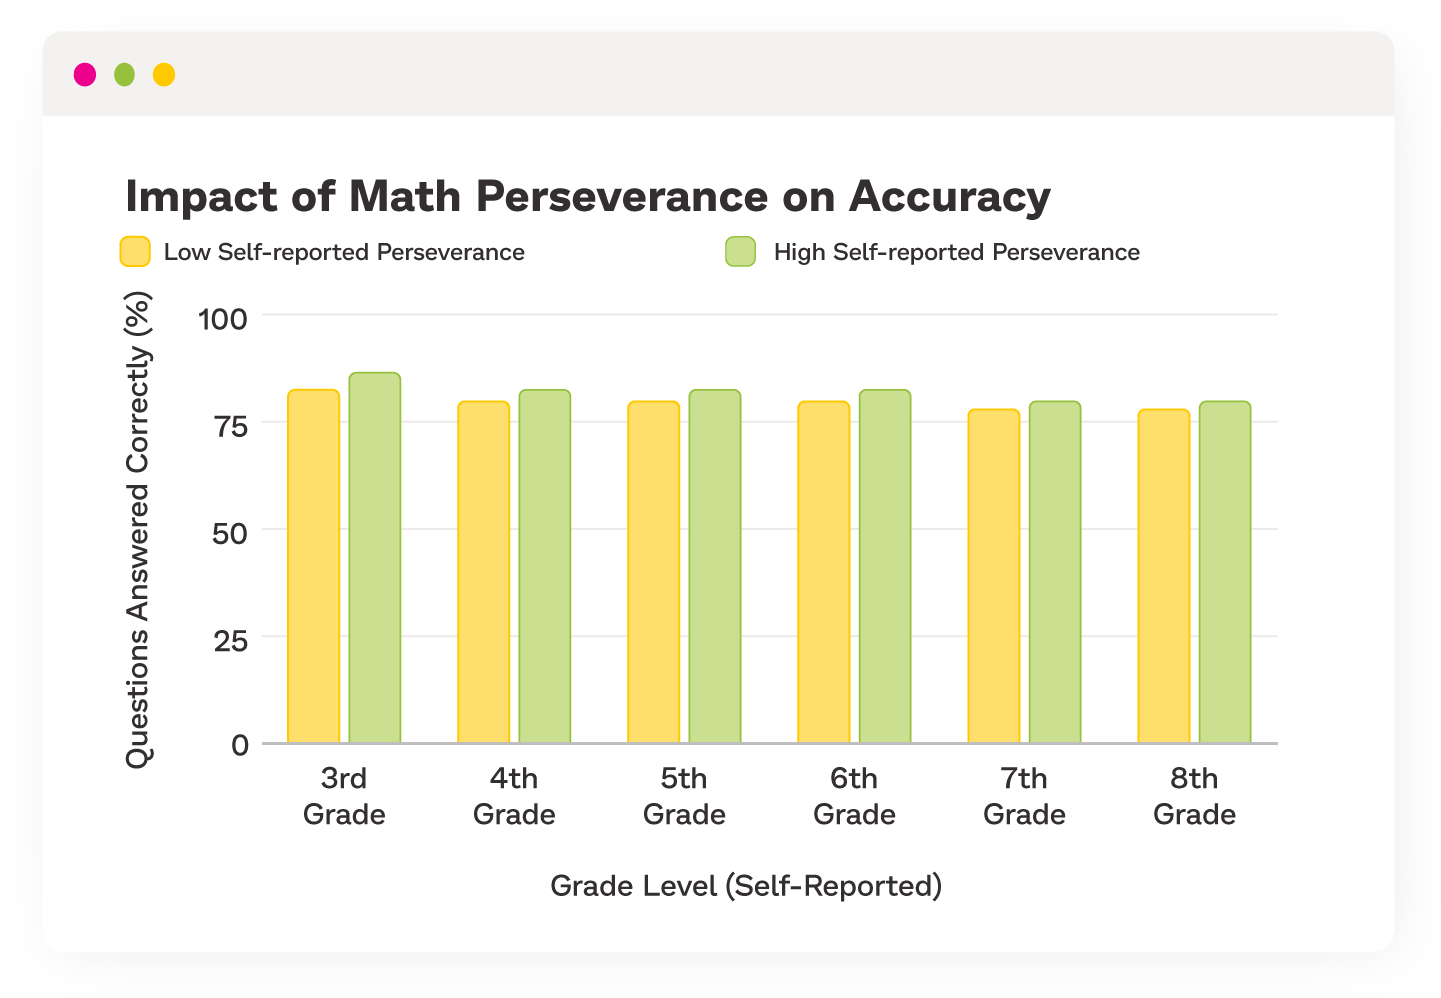 Bar chart broken down by grade showing the impact of math perseverance on accuracy.